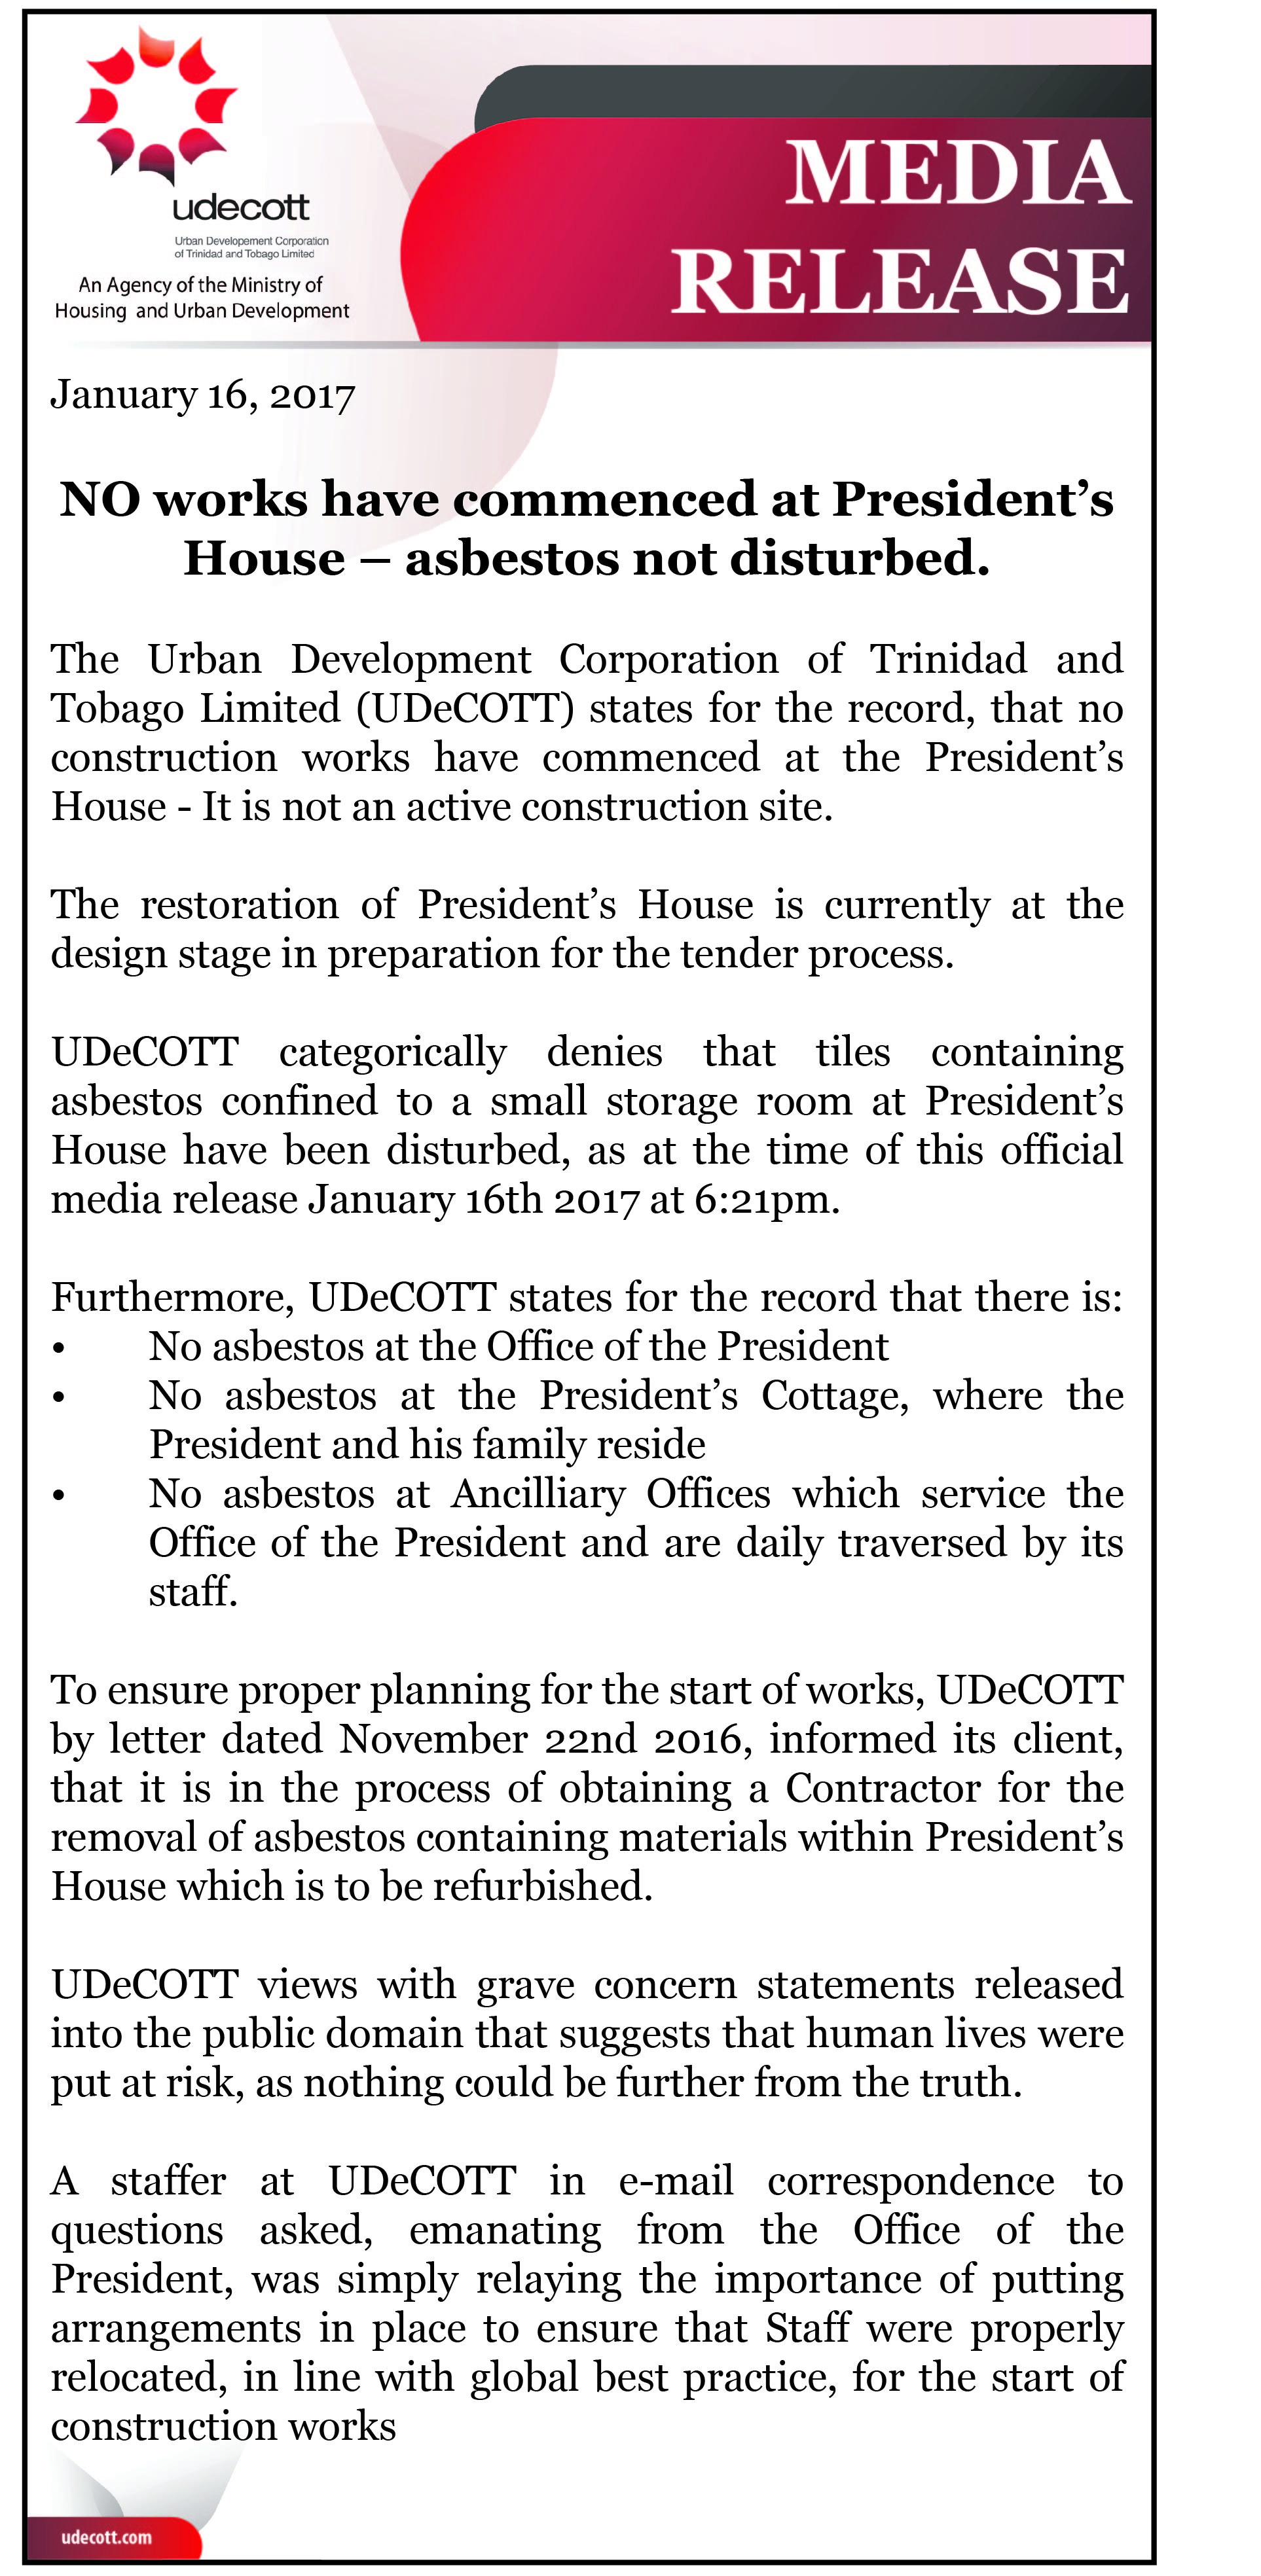 udecott-media-release-no-works-have-commenced-at-presidents-house-asbestos-not-disturbed